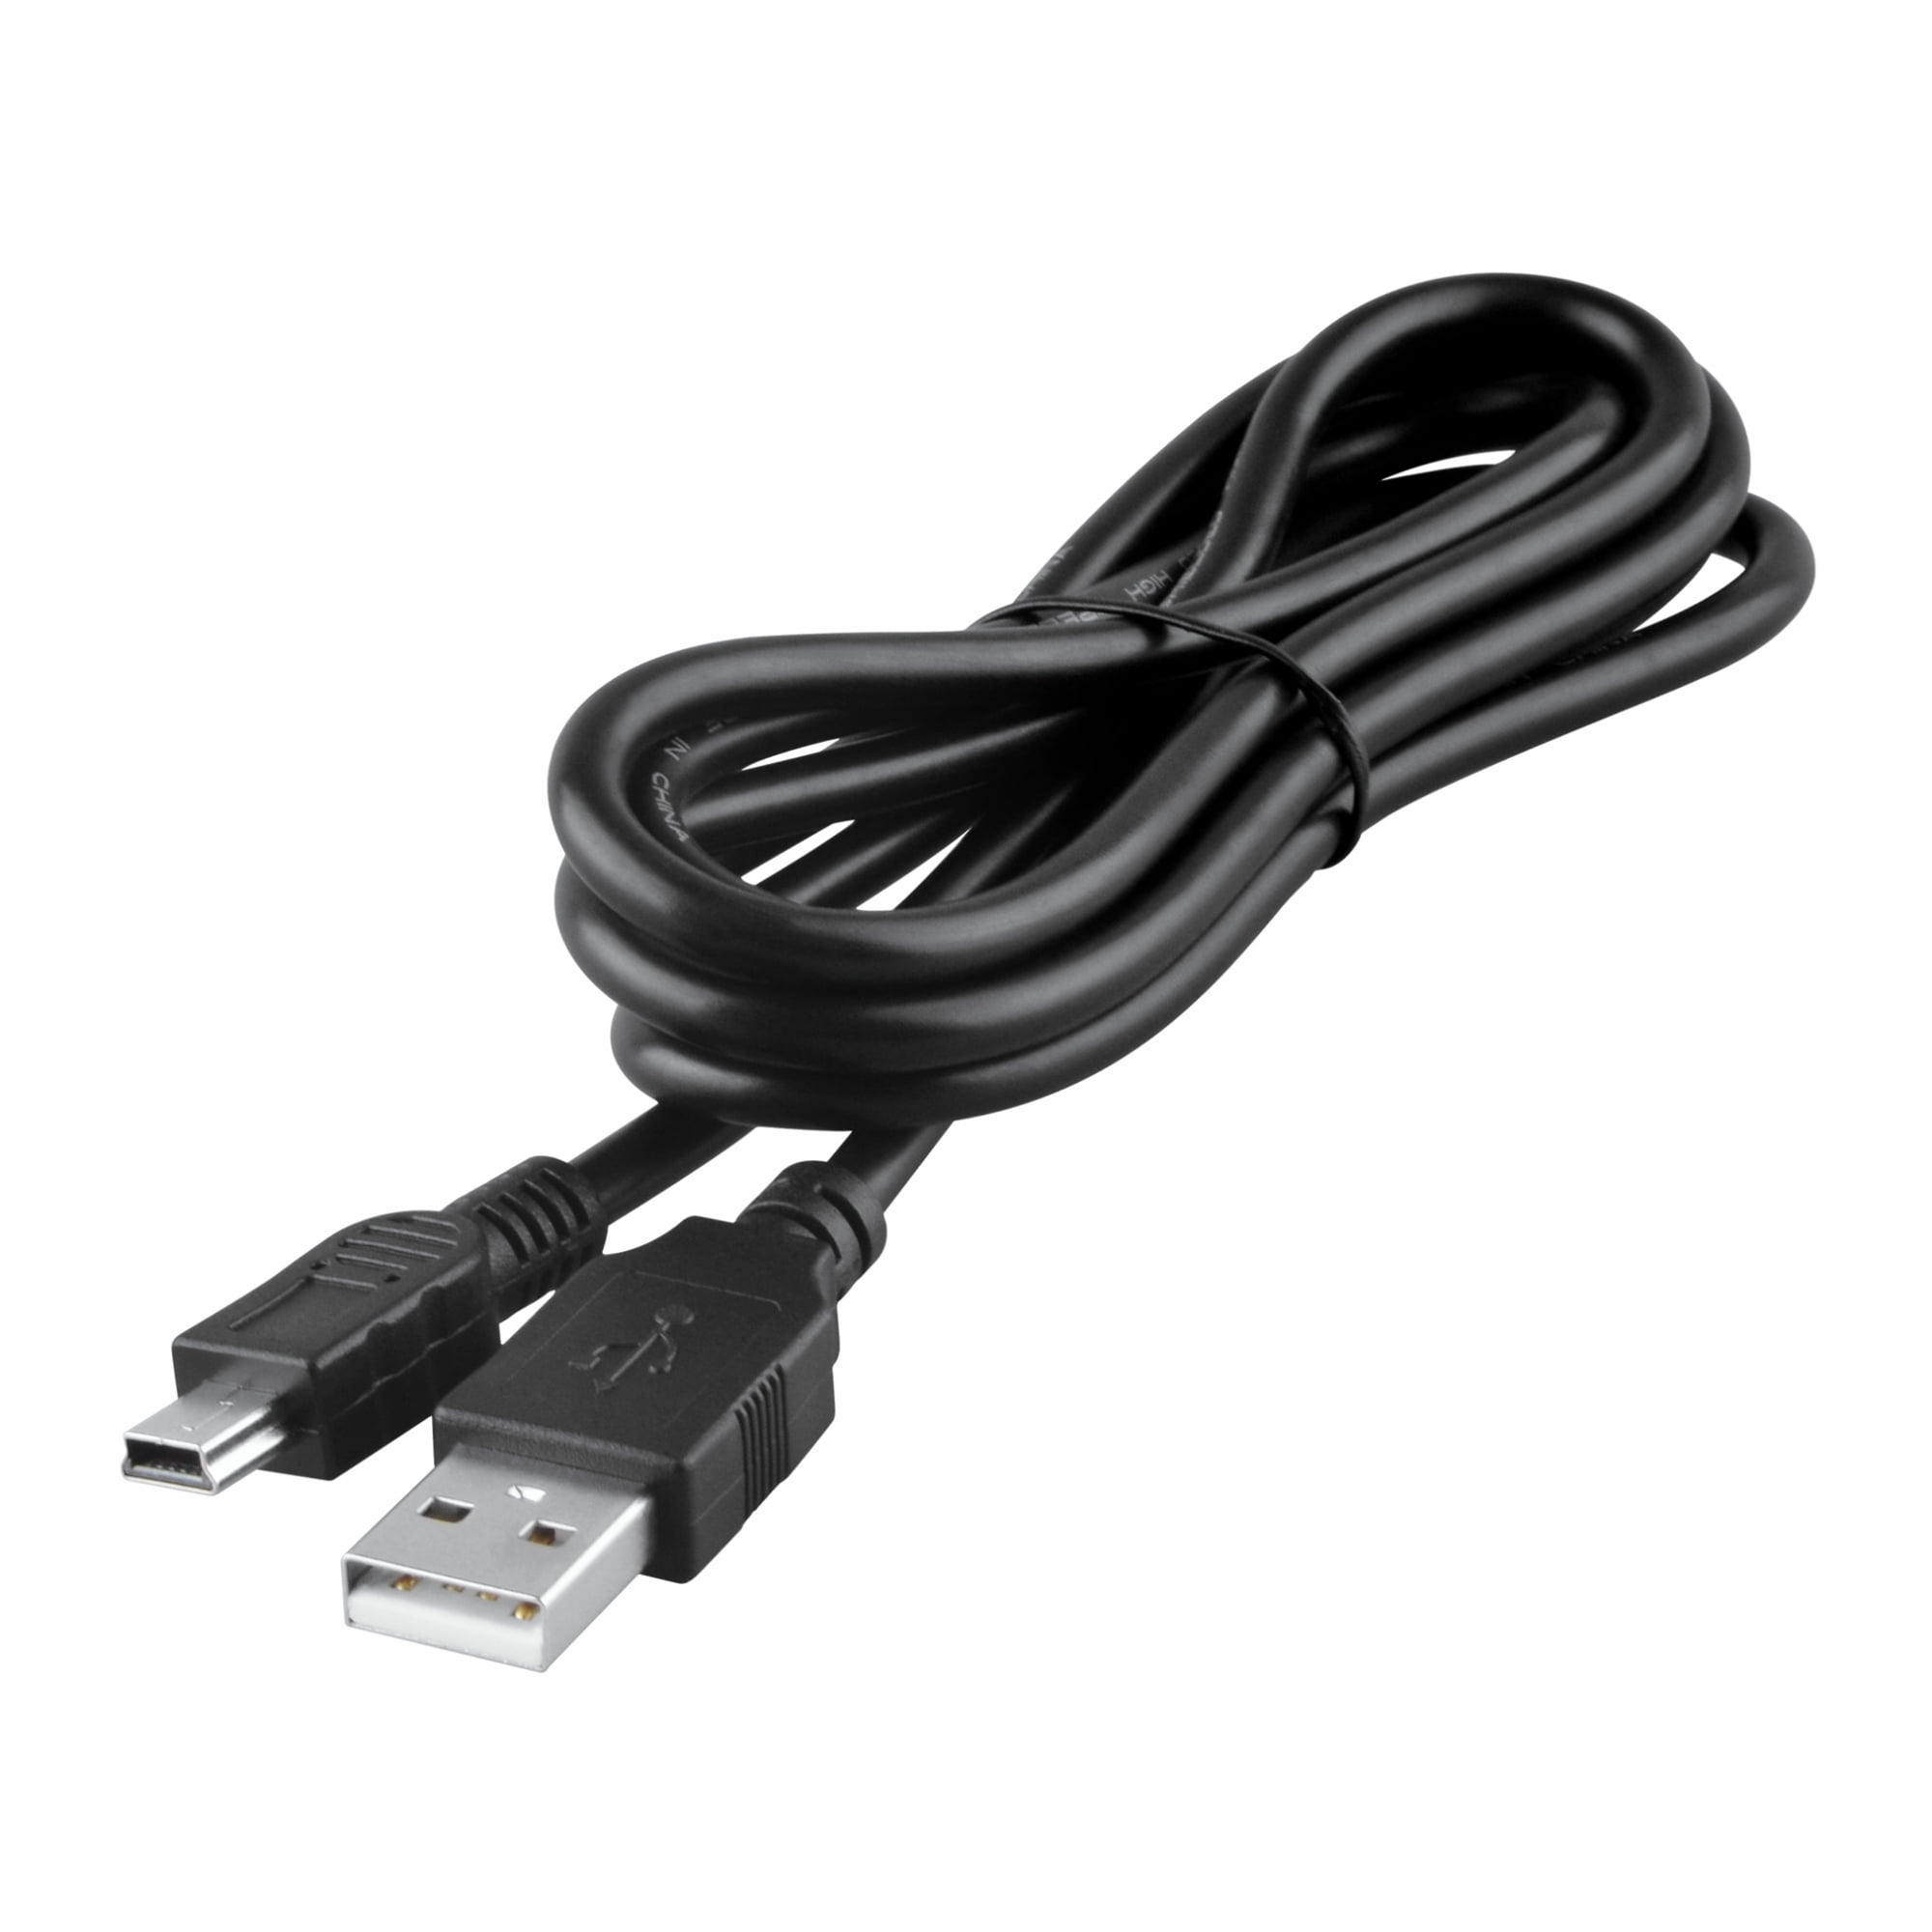 ABLEGRID USB 2.0 Cable Cord for Transcend TS160GSJ25M STOREJET 25 Mobile 160GB 2.5 External HDD 